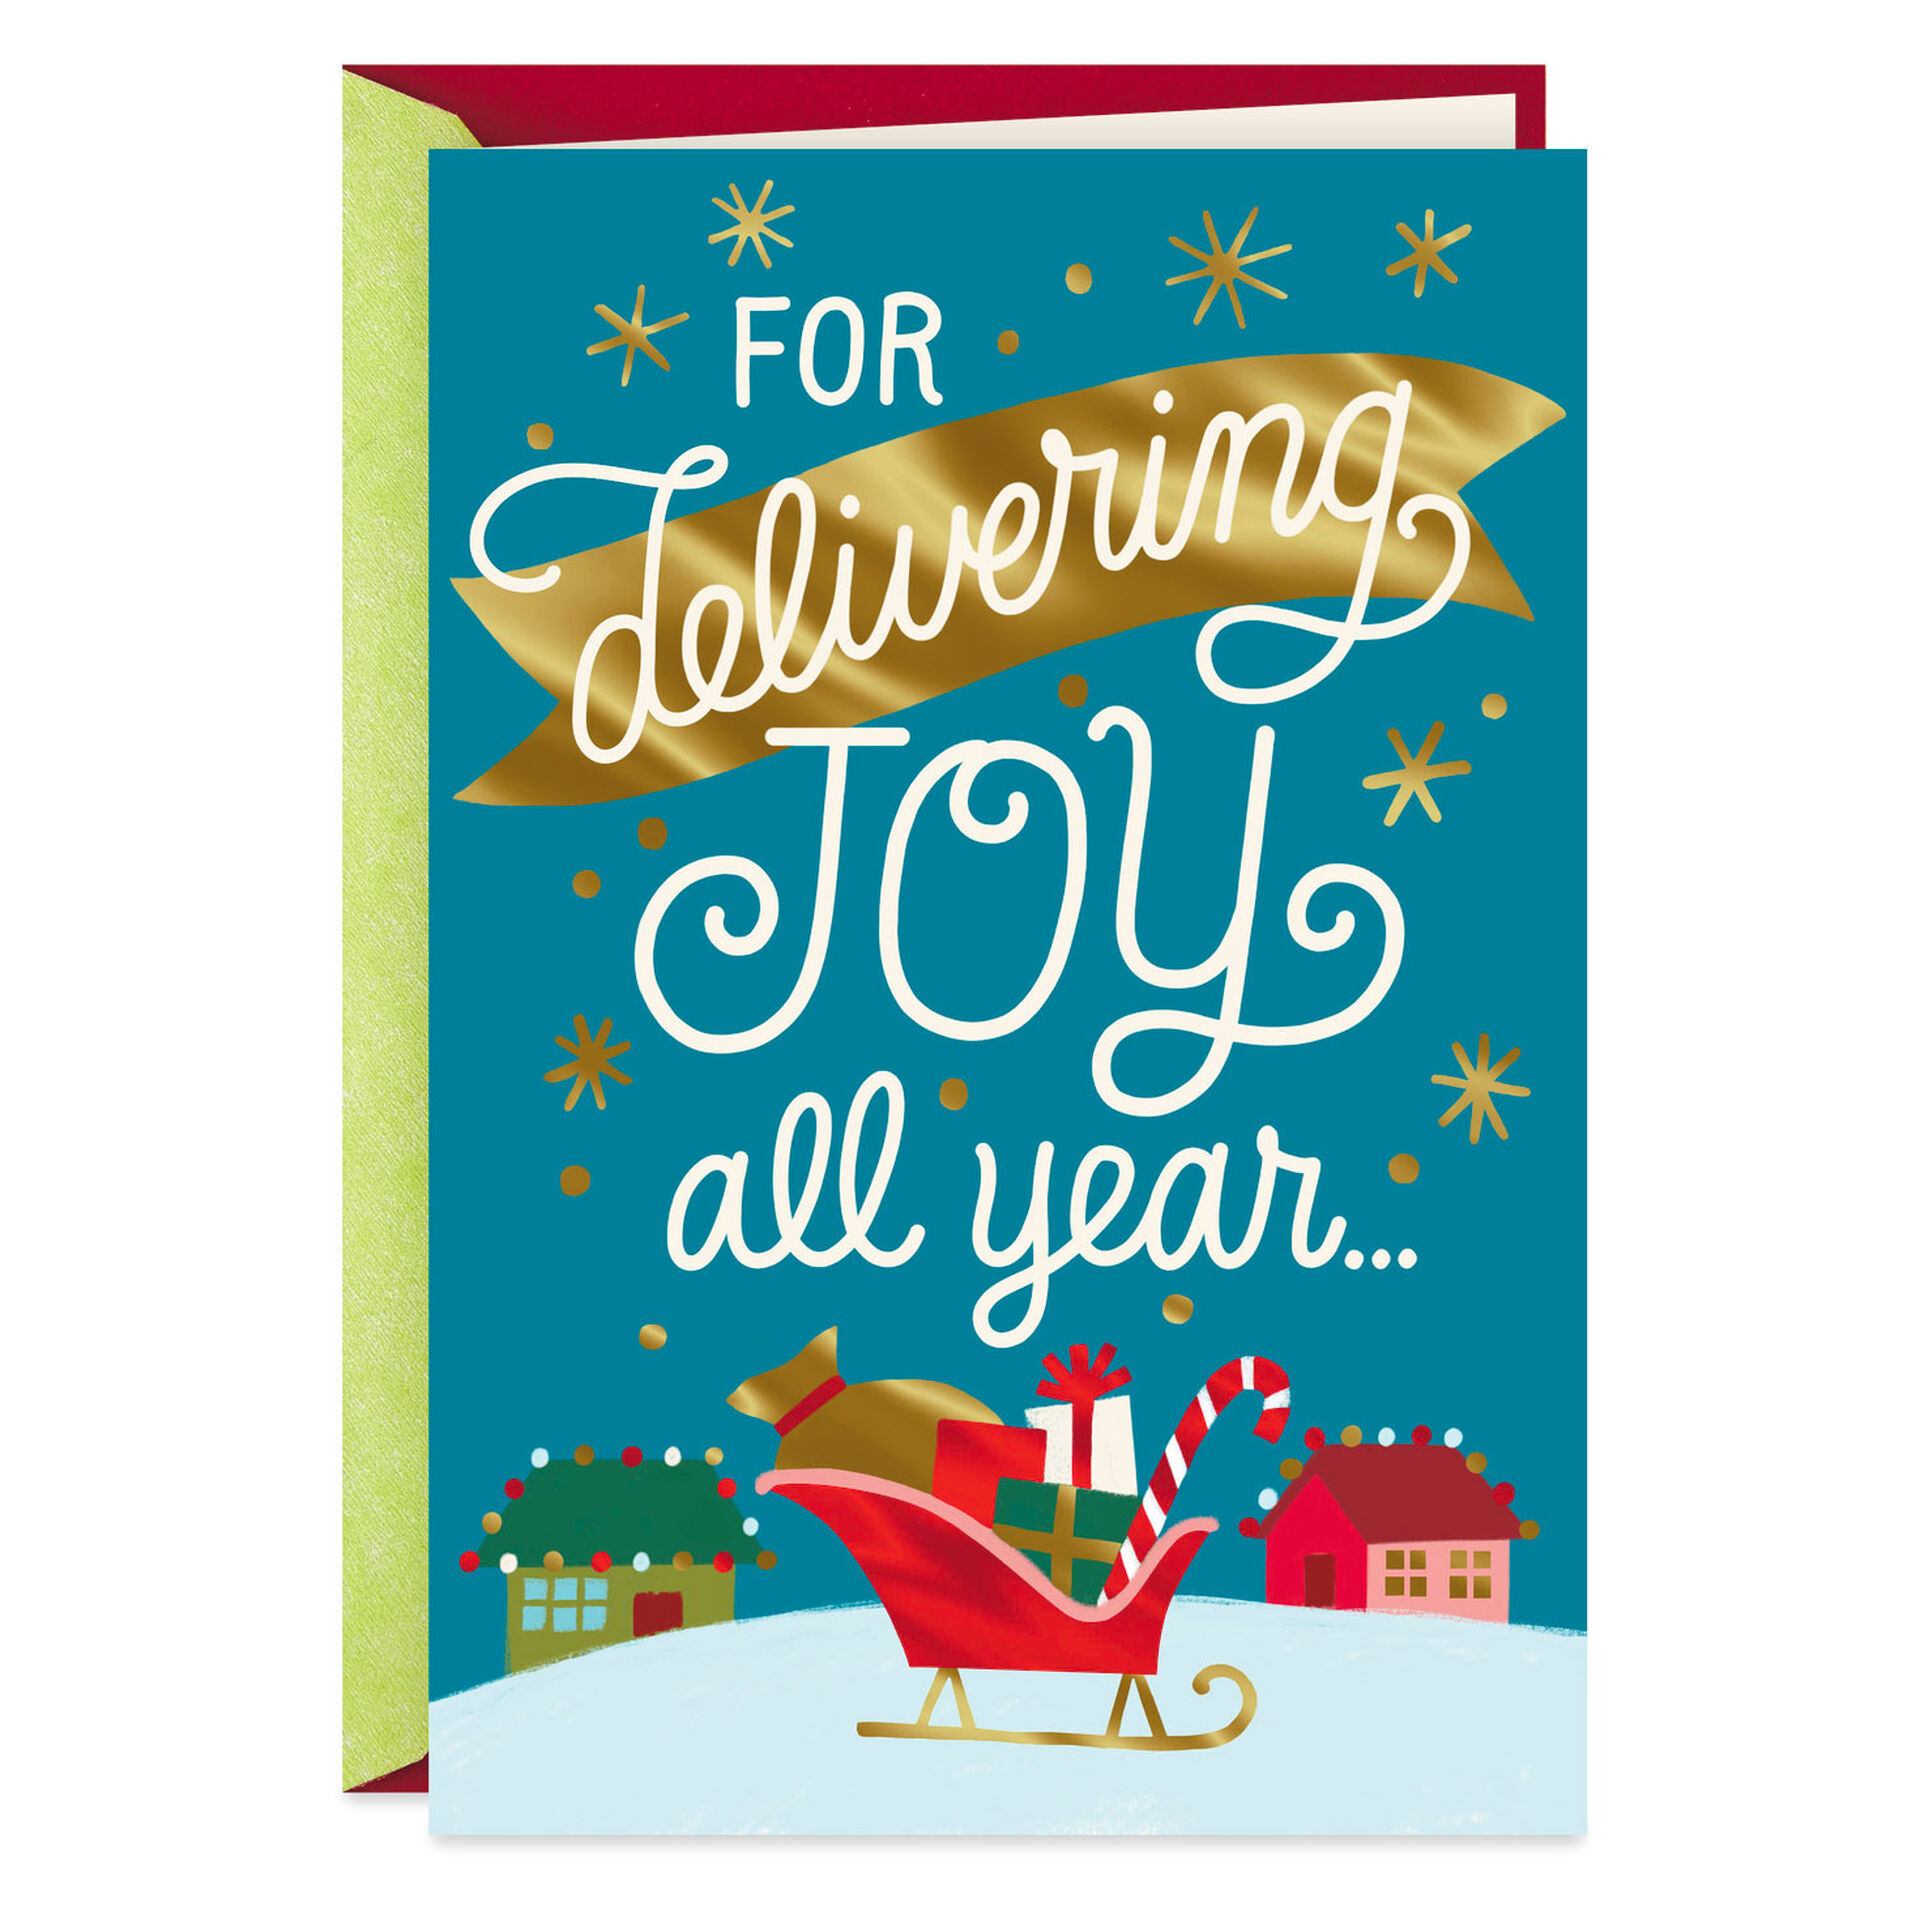 you-deliver-joy-all-year-christmas-card-for-mail-carrier-greeting